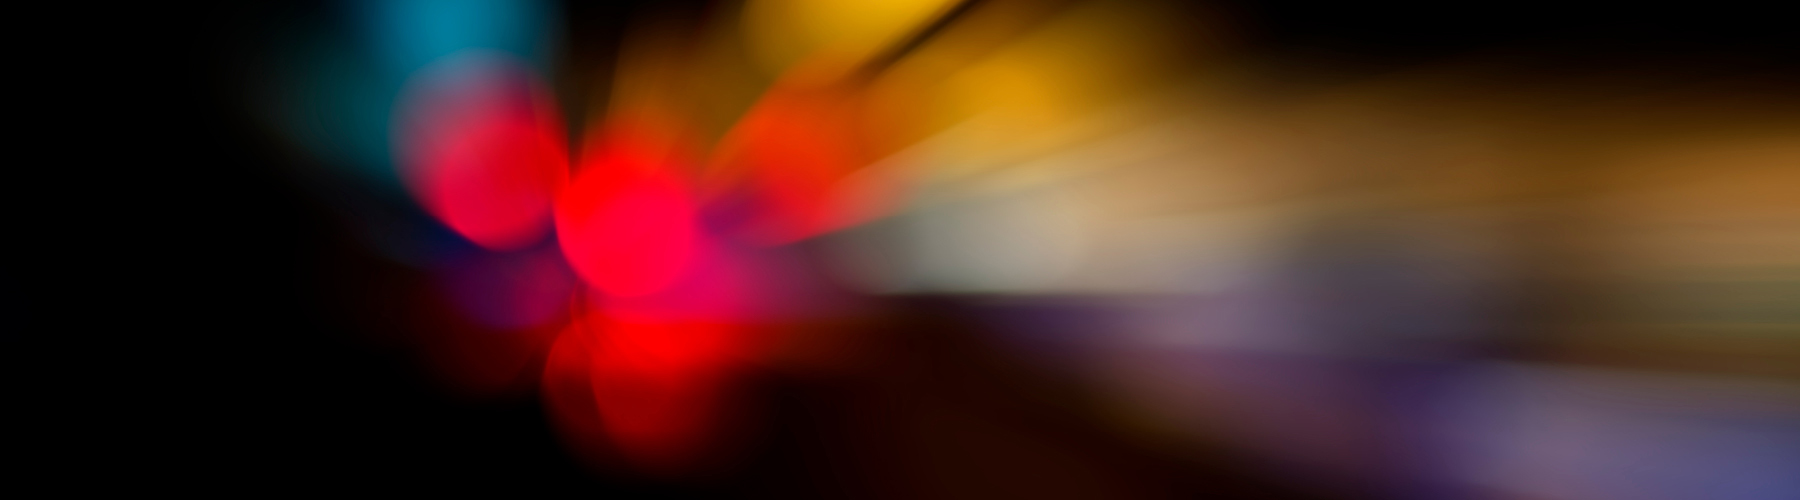 Abstract image with red dots and orange, white, purple and blue blurred lines